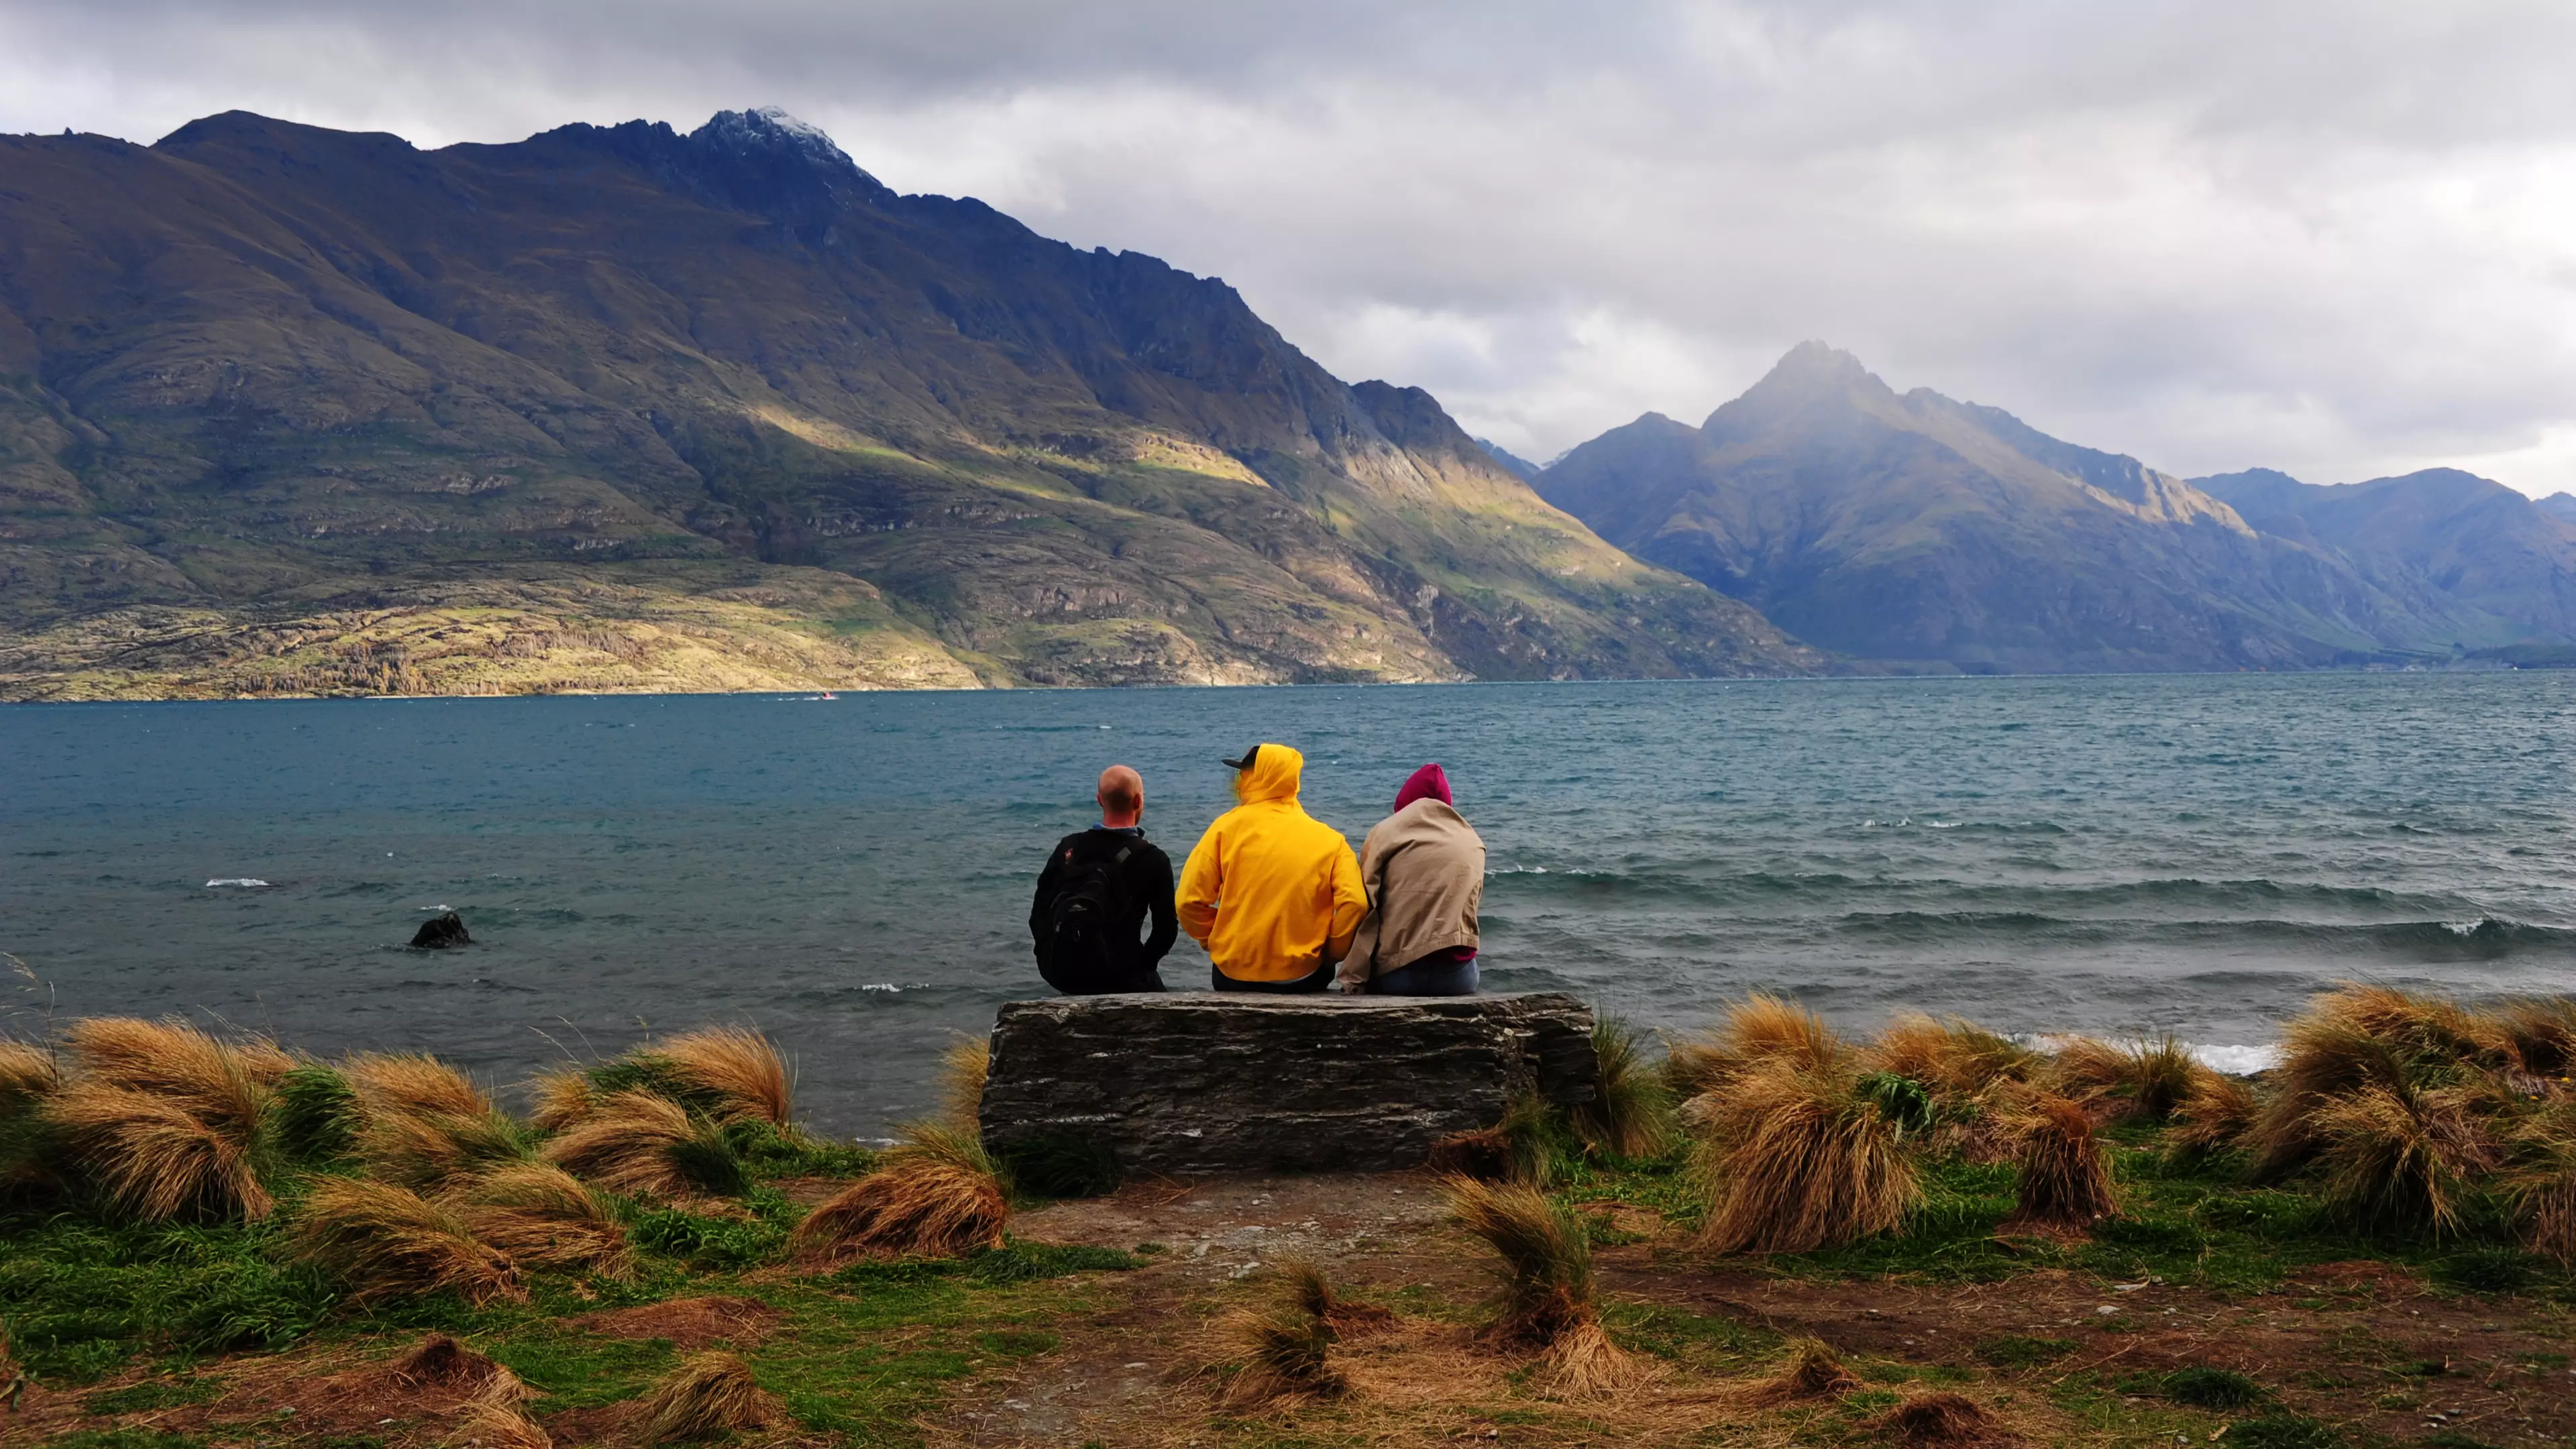 Quarantine-Free Holidays To New Zealand Could Begin Next Month